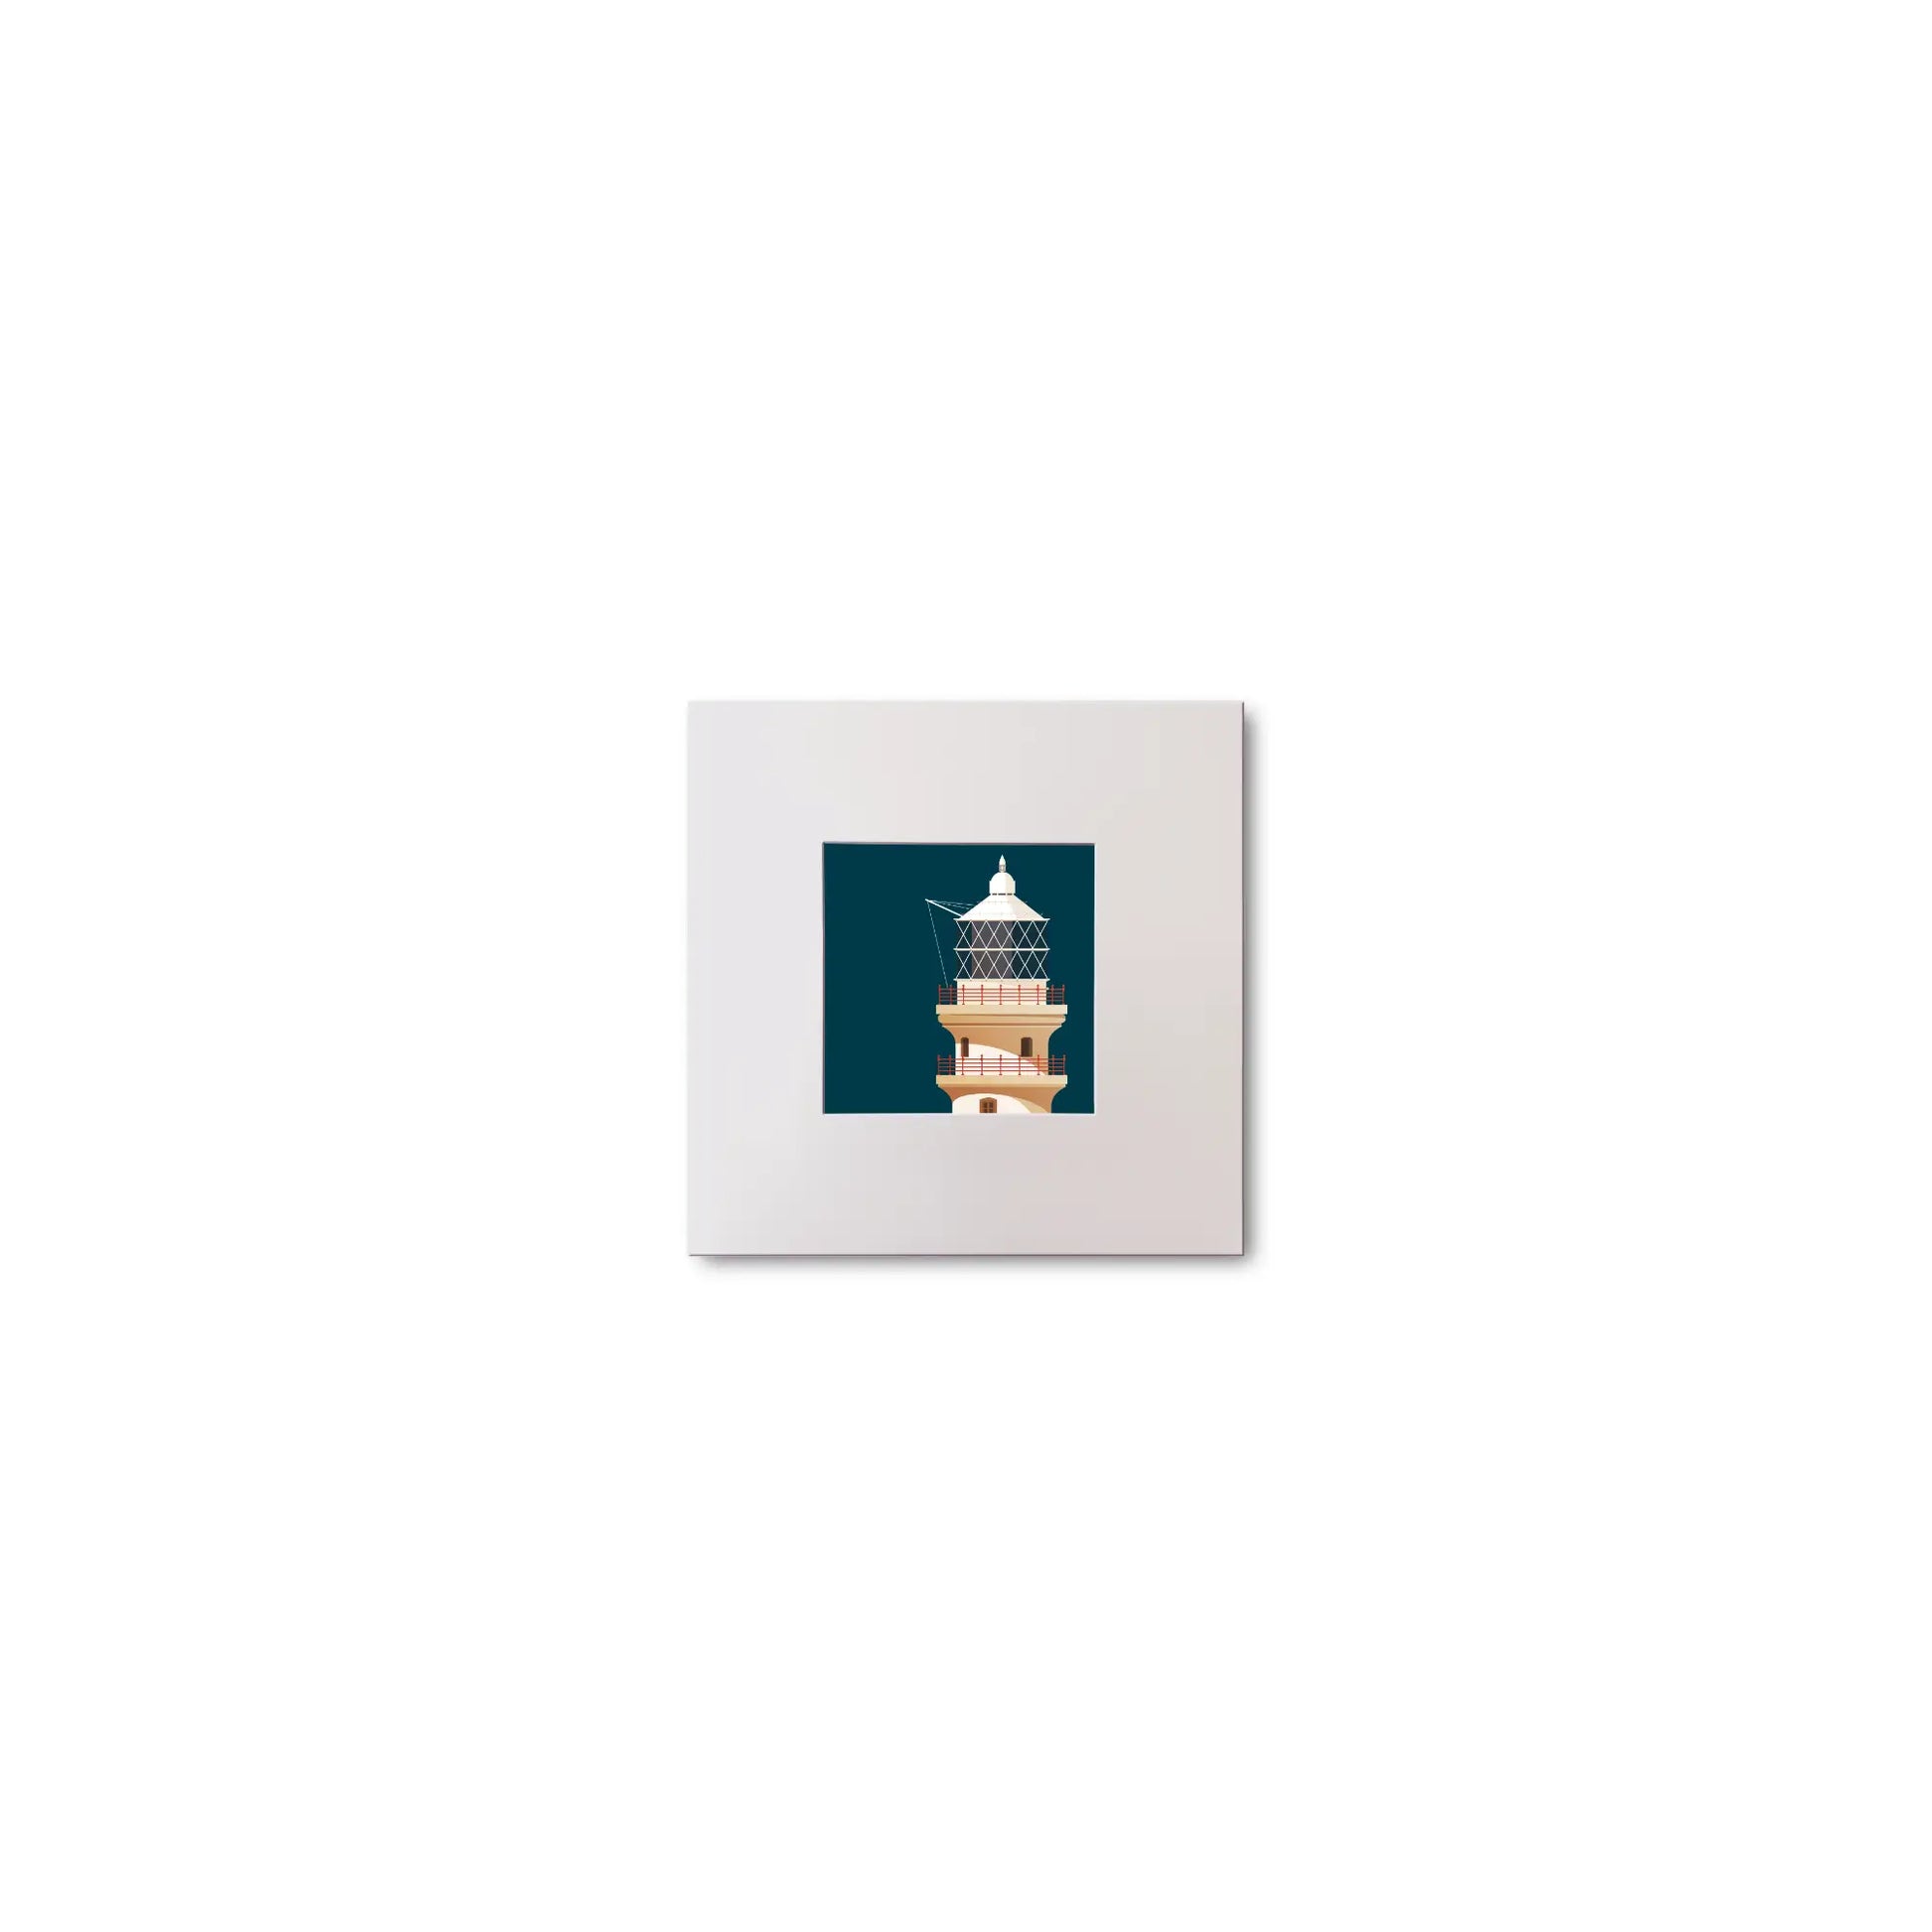 Illustration of Fastnet lighthouse on a midnight blue background, mounted and measuring 10x10cm.